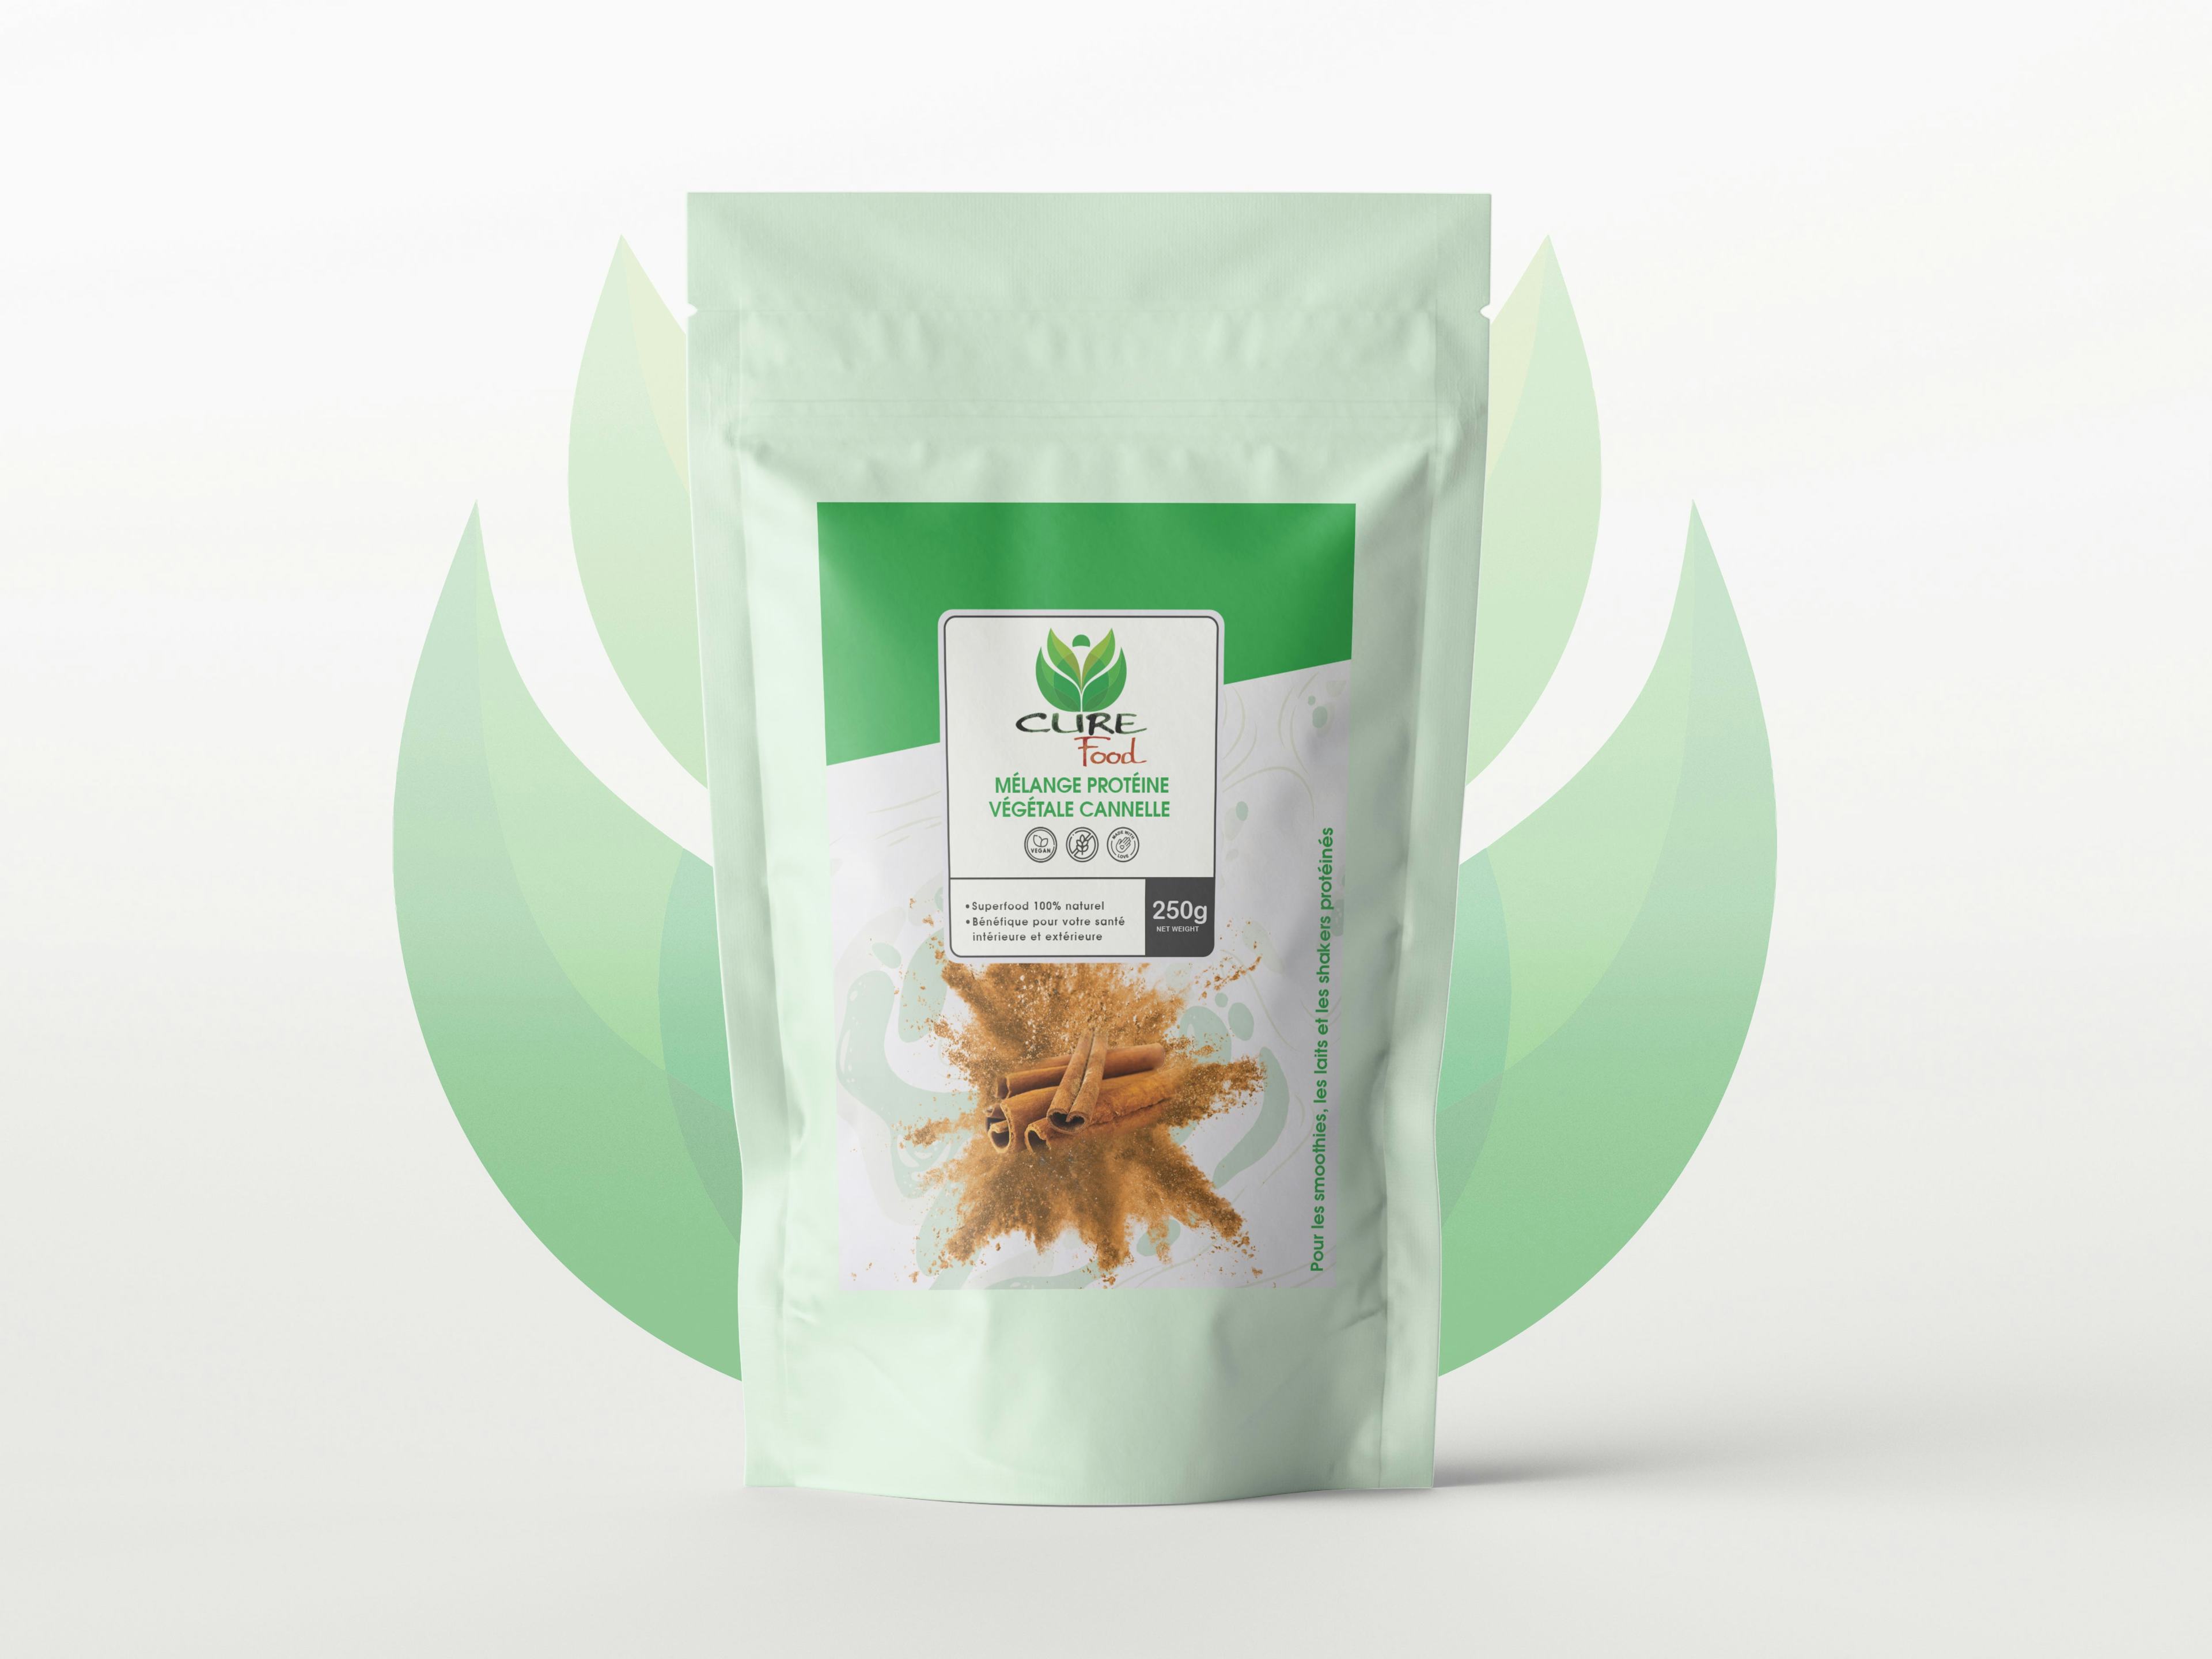 Cinnamon Plant Protein Blend, artisanal product for direct sale in Switzerland